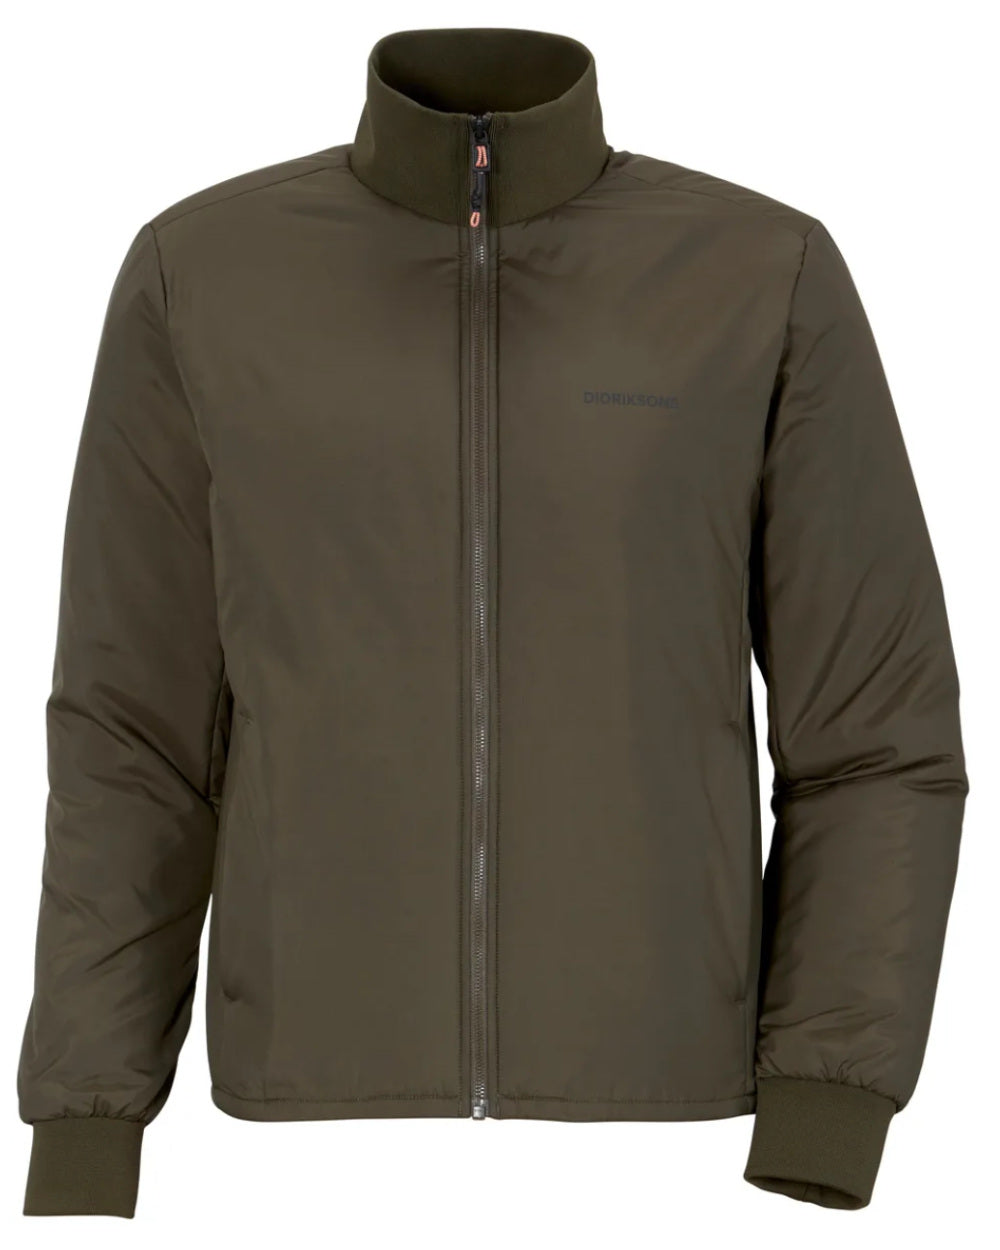 Fog Green Coloured Didriksons Peder Jacket On A White Background 